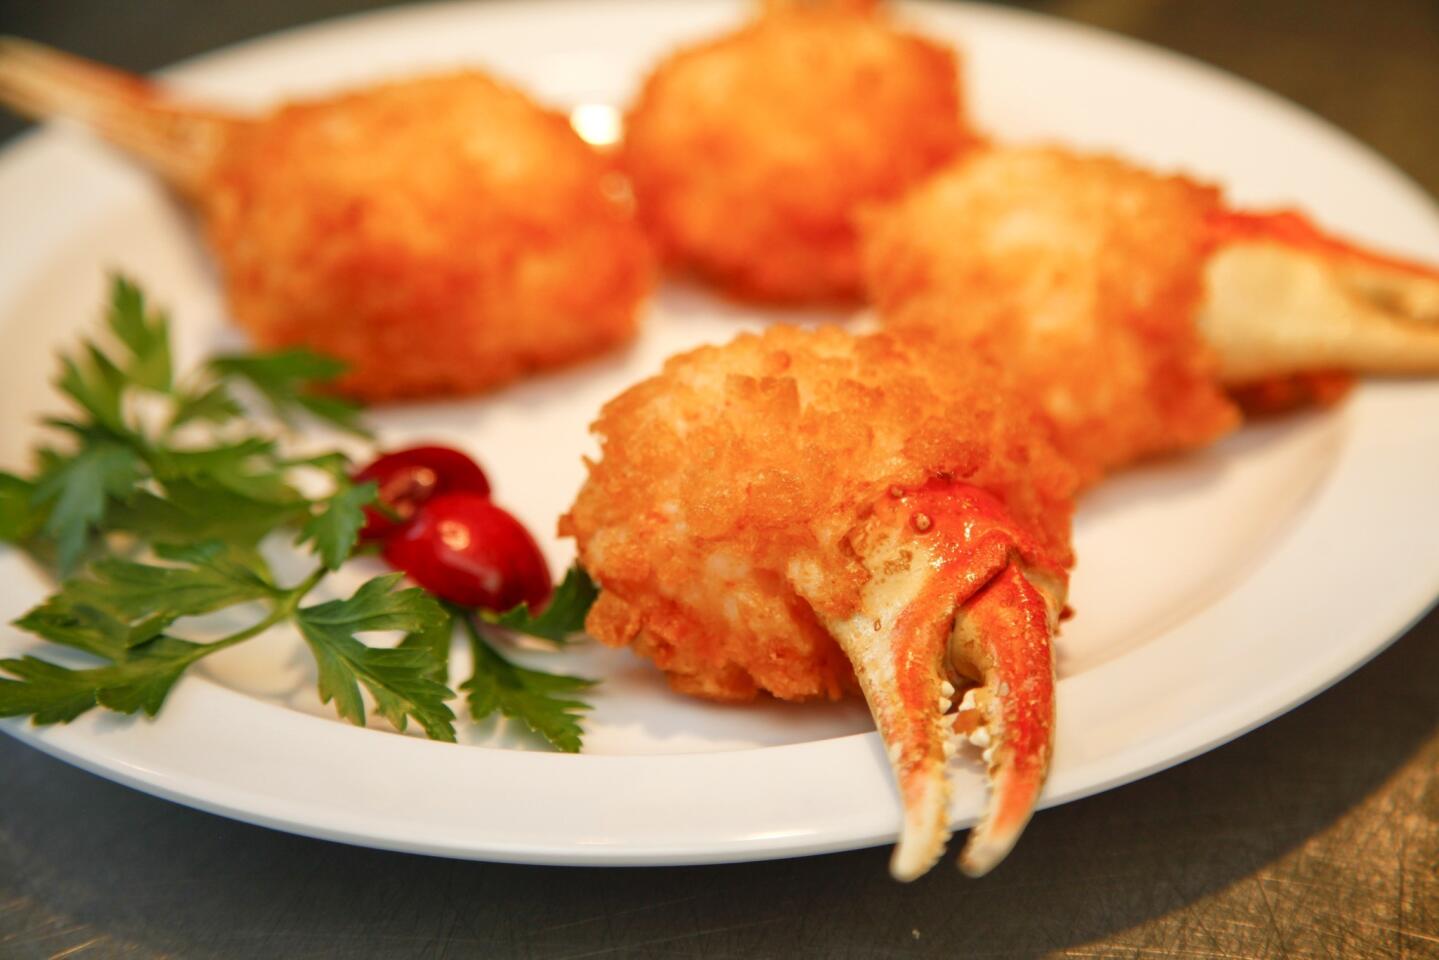 Fried crab claws stuffed with shrimp